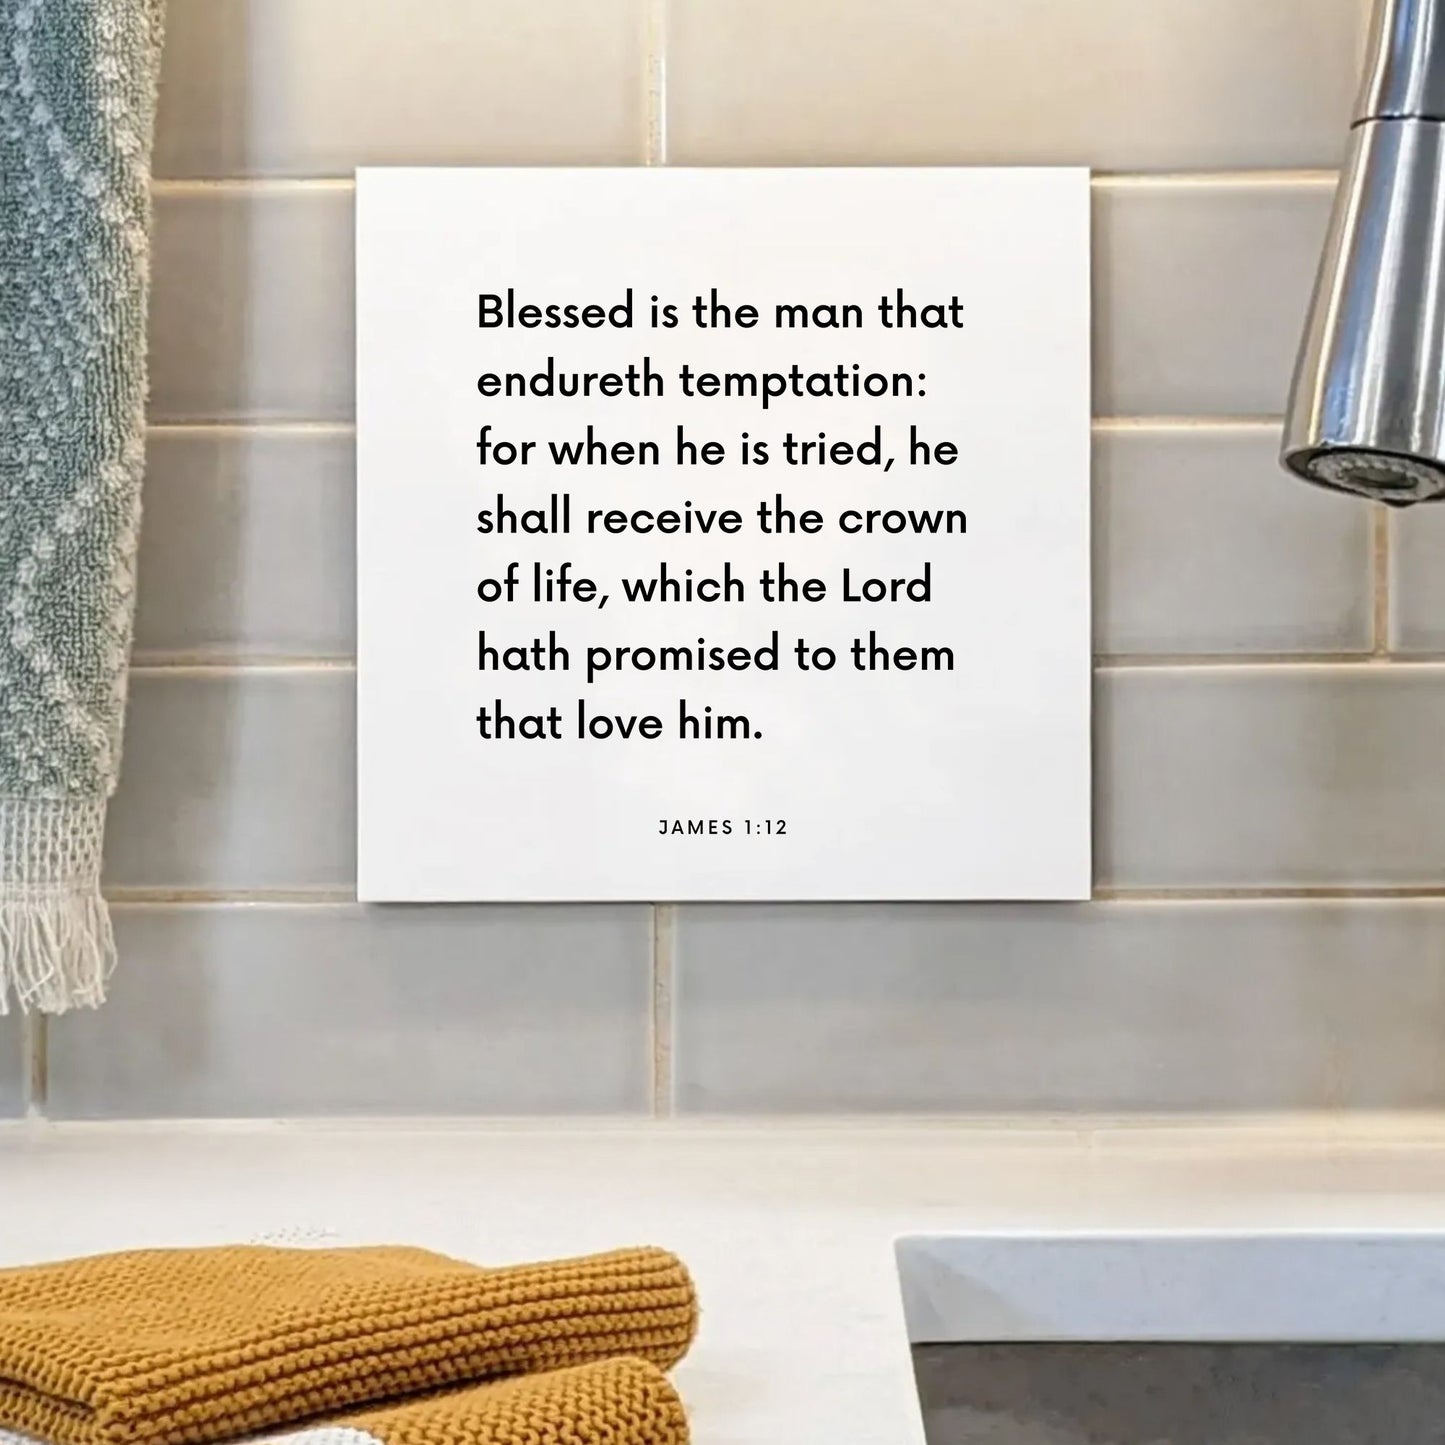 Sink mouting of the scripture tile for James 1:12 - "Blessed is the man that endureth temptation"